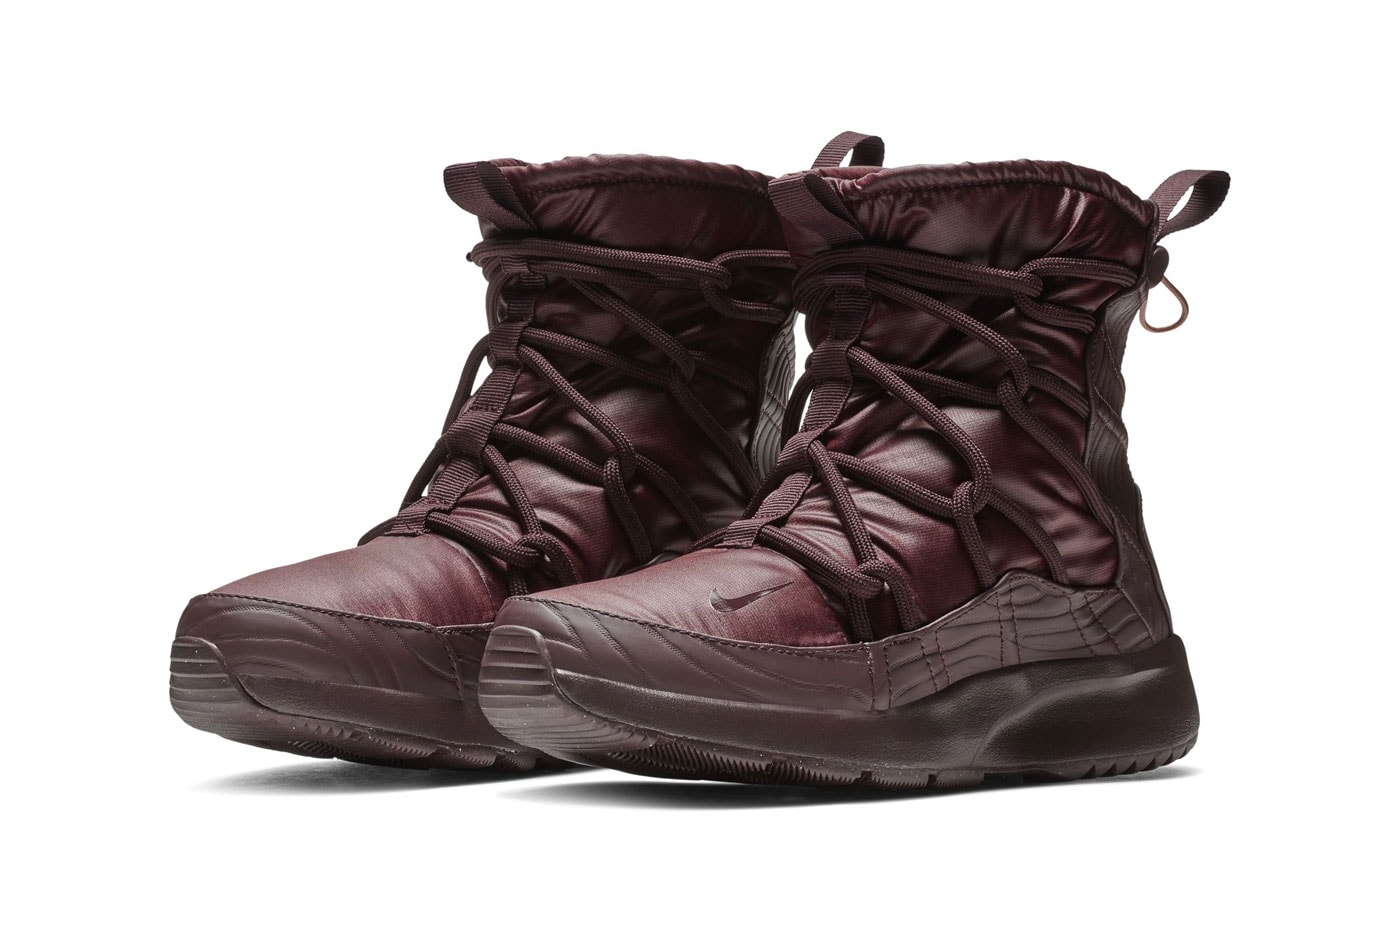 Nike Tanjun High Rise Boot New Colorways Fall 2018 olive maroon black white release date info price sneakers winter